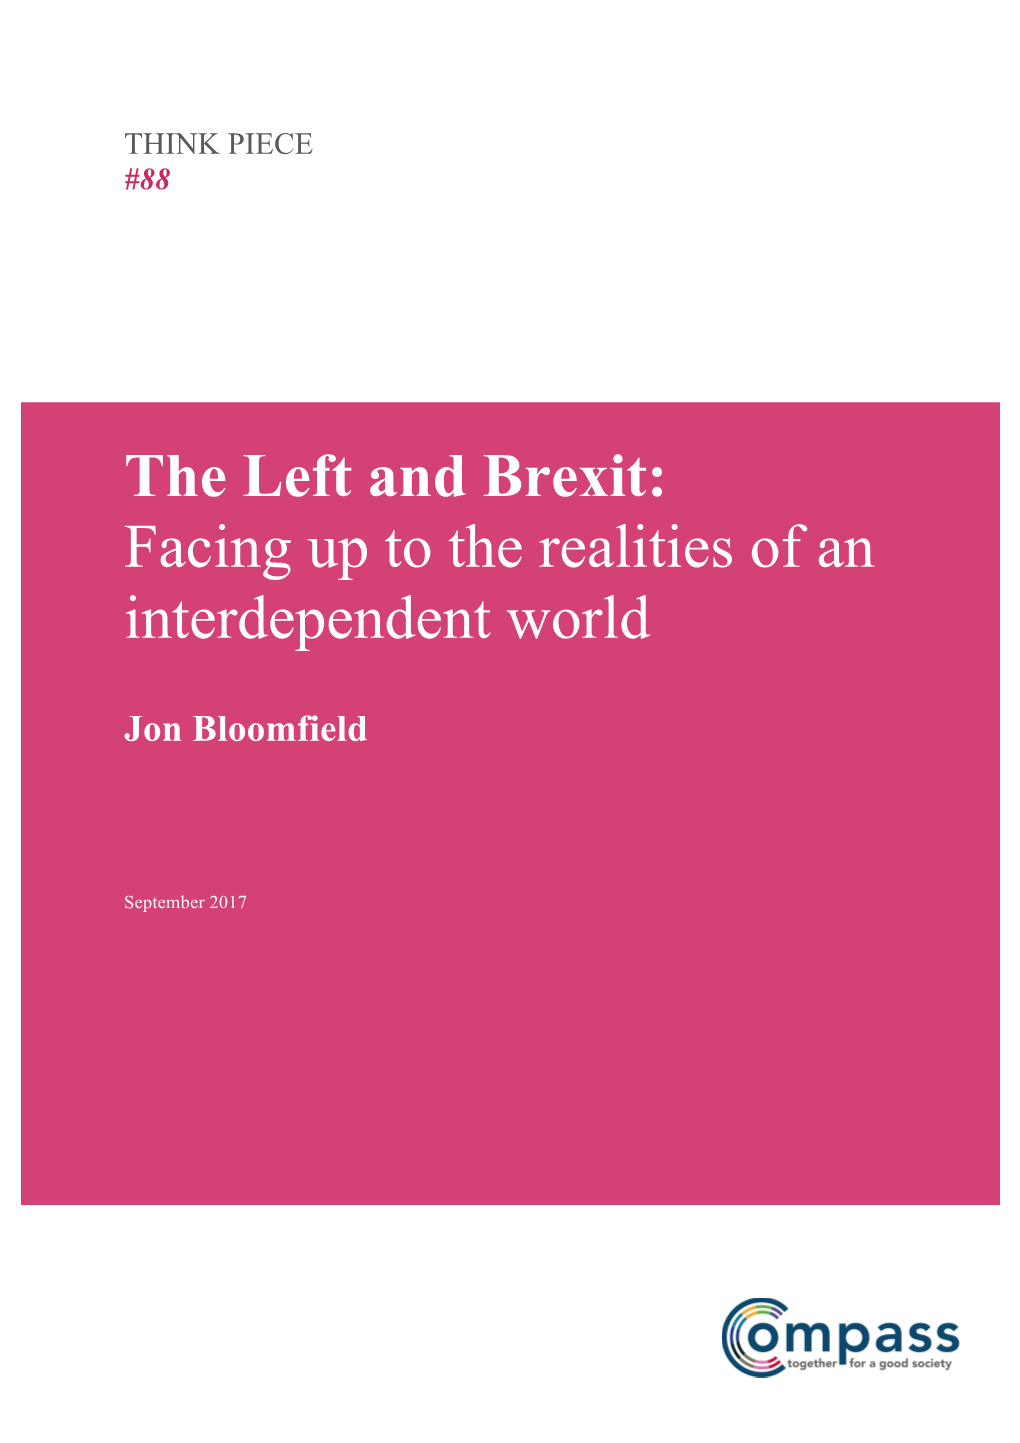 The Left and Brexit: Facing up to the Realities of an Interdependent World